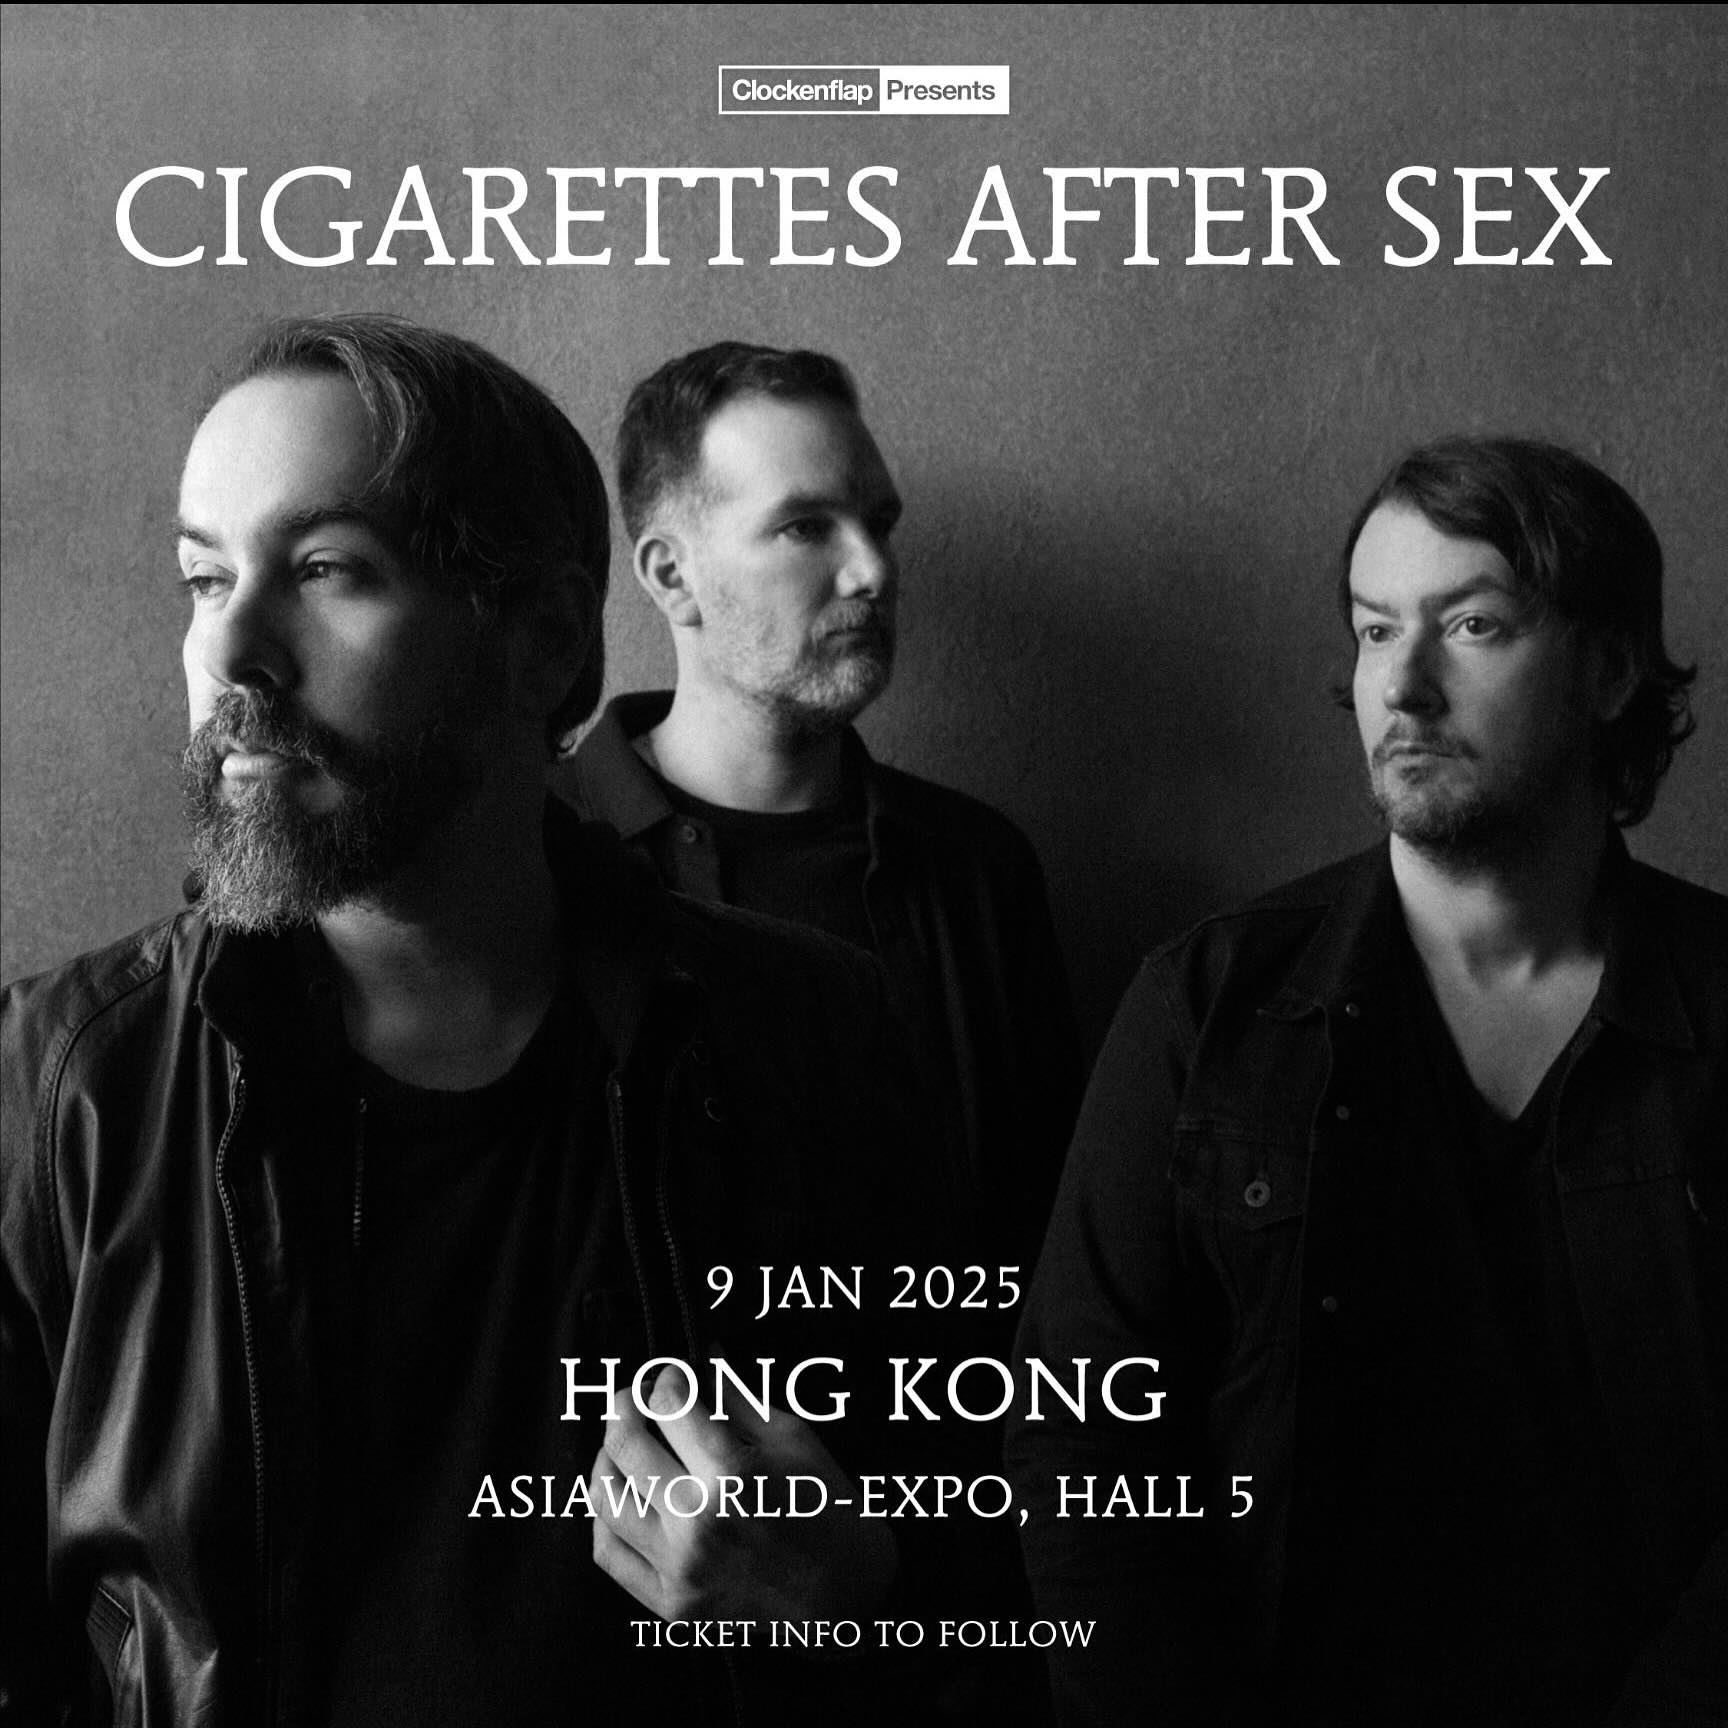 Cigarettes After Sex band performing live in 2025